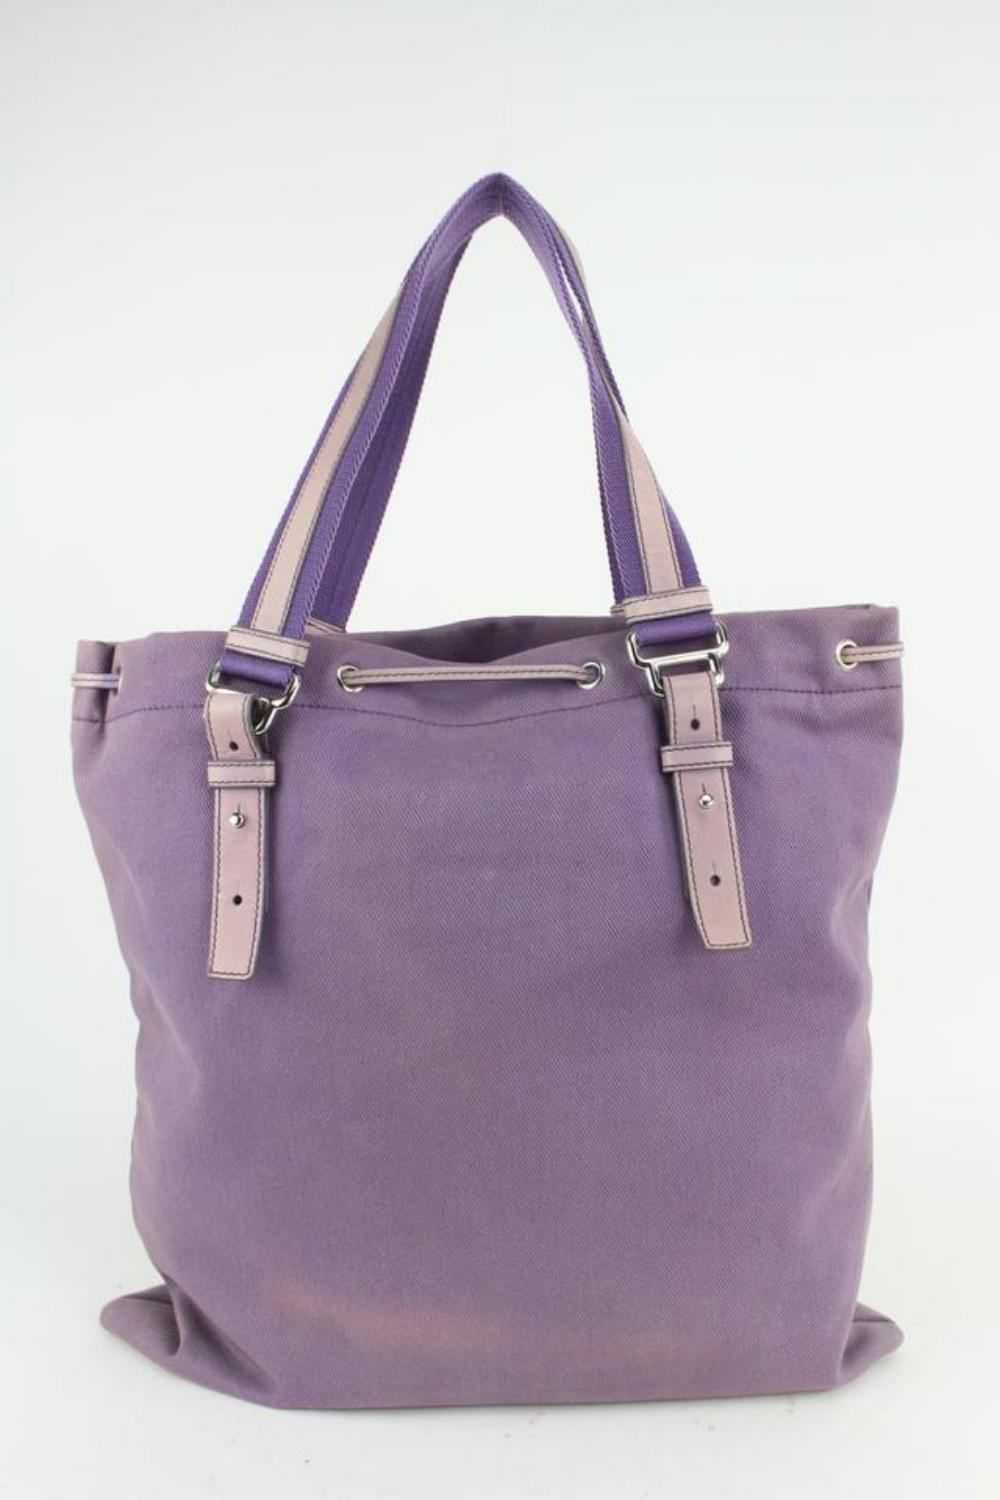 Saint Laurent Purple YSL Kahala Tote Bag 25sl712s In Good Condition In Dix hills, NY